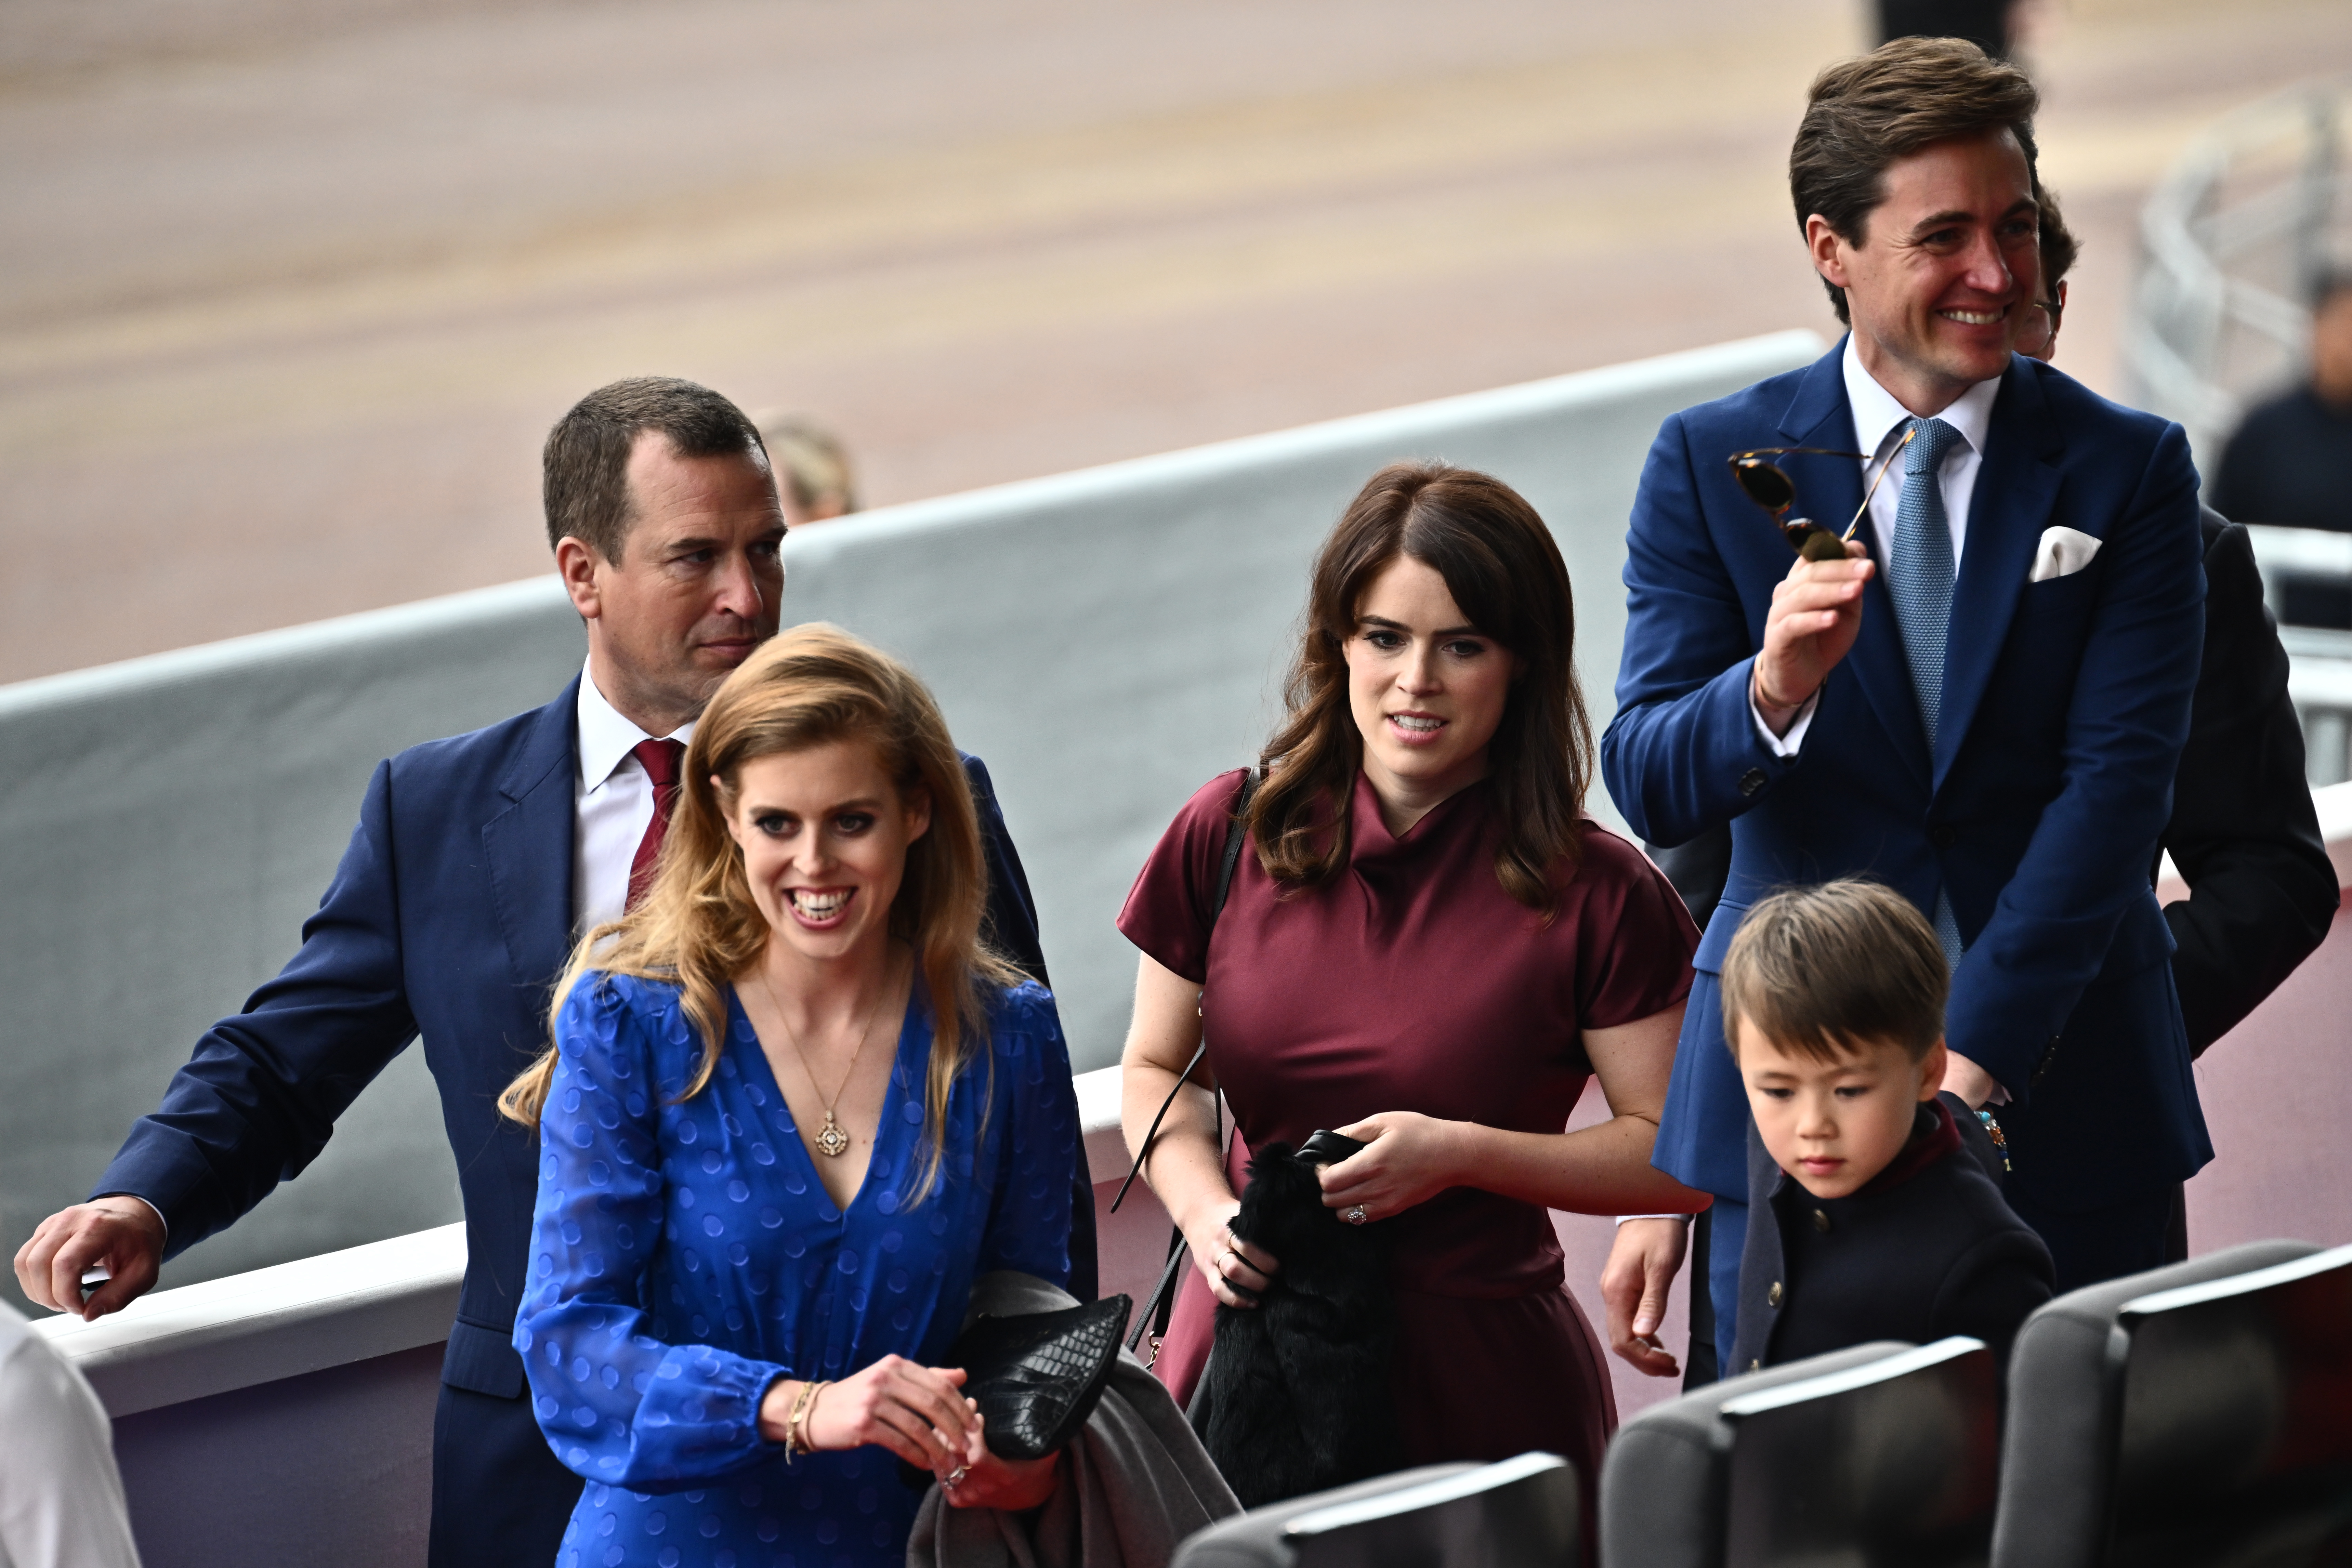 Princess Beatrice, Princess Eugenie, and Edoardo Mapelli Mozzi attend the Platinum Pageant, celebrating Queen Elizabeth II's 70th accession anniversary on June 5, 2022, in London, England. | Source: Getty Images